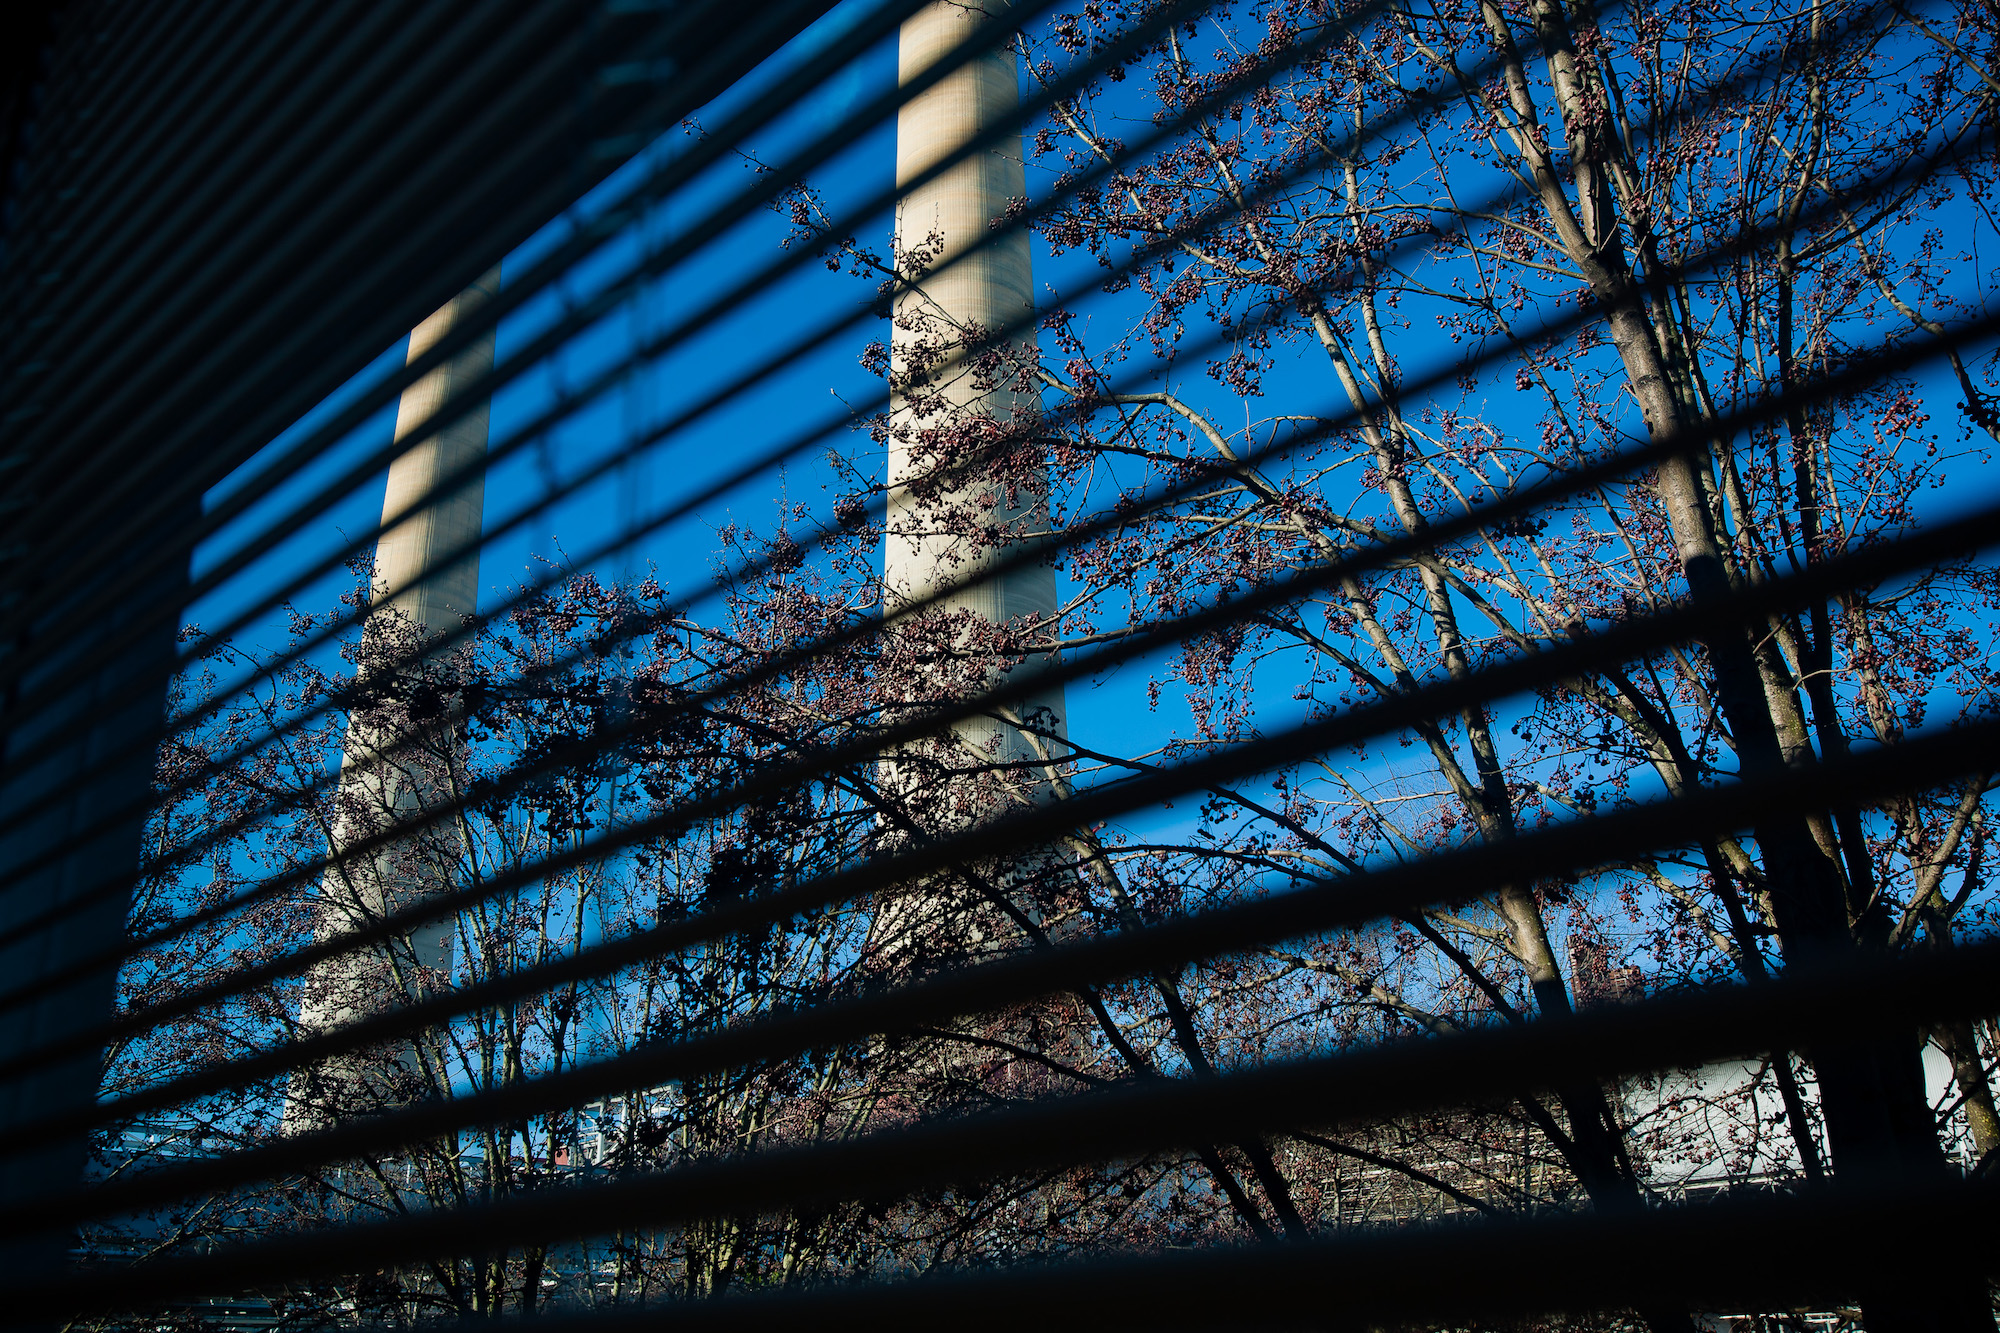 A view through office blinds of the stacks at the TVA Fossil Plant in Kingston, Tennessee.